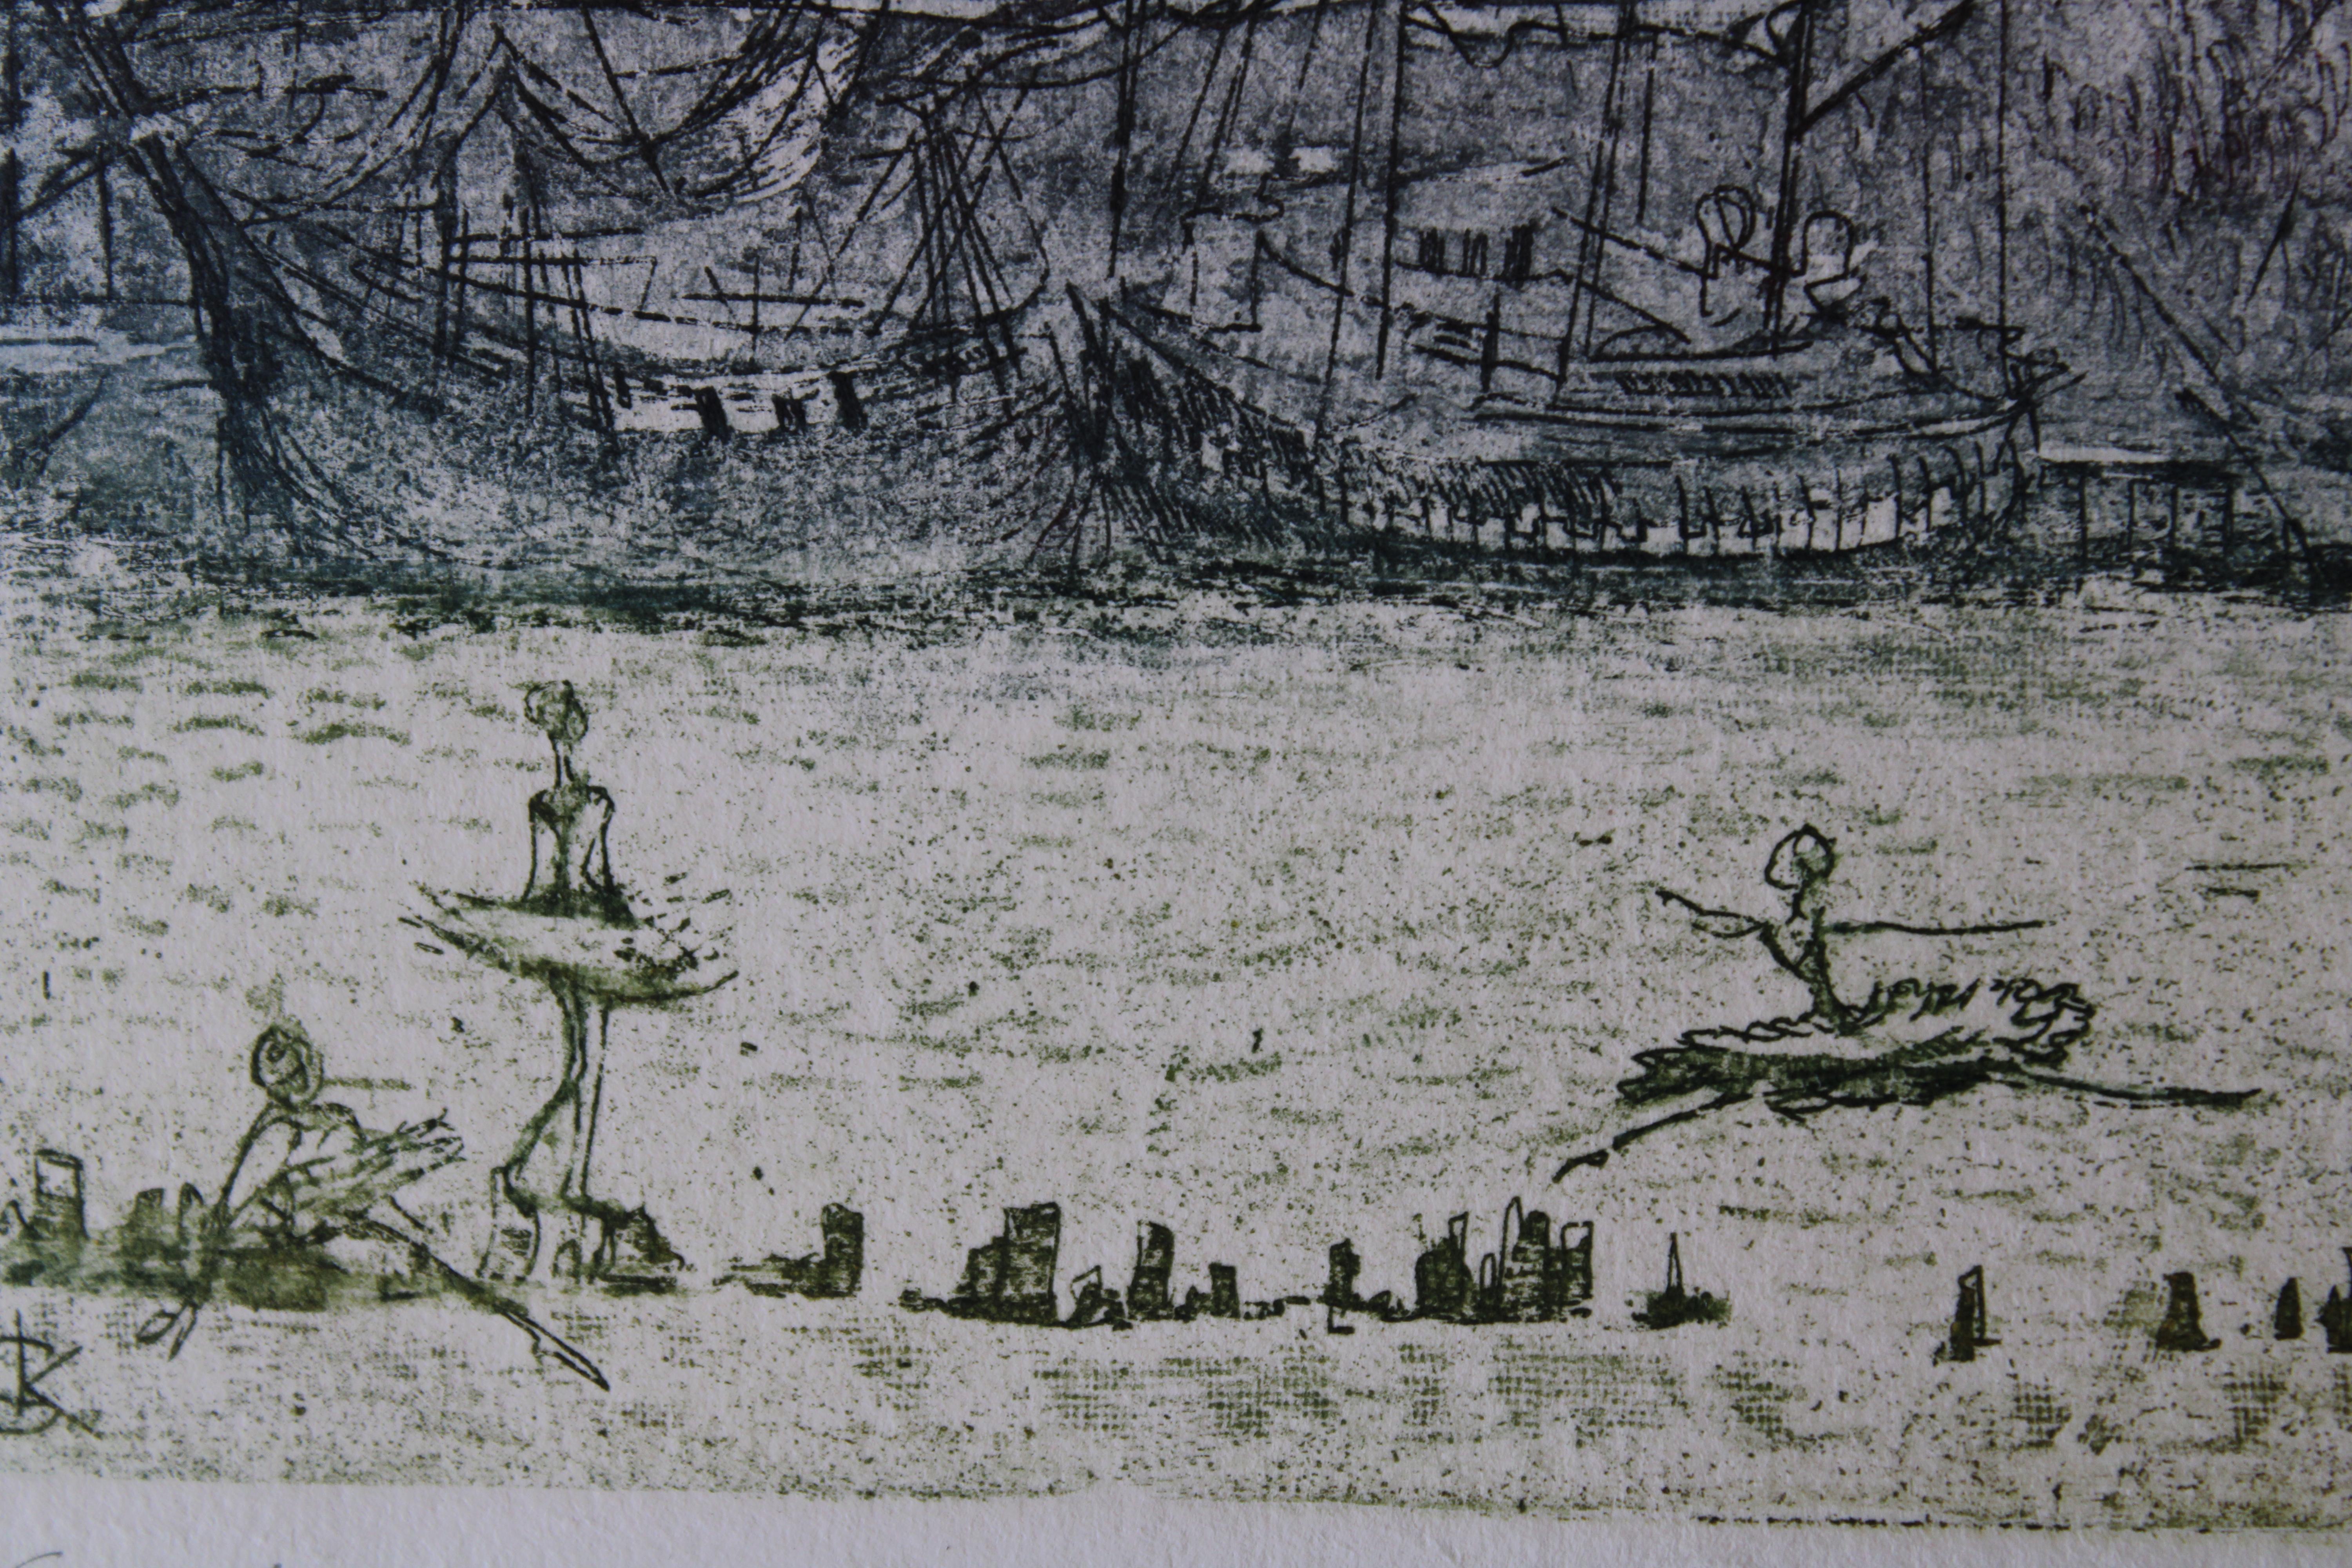 Holiday in Old Town  11/30, paper, etching, soft varnish, 15x19.5 cm For Sale 2